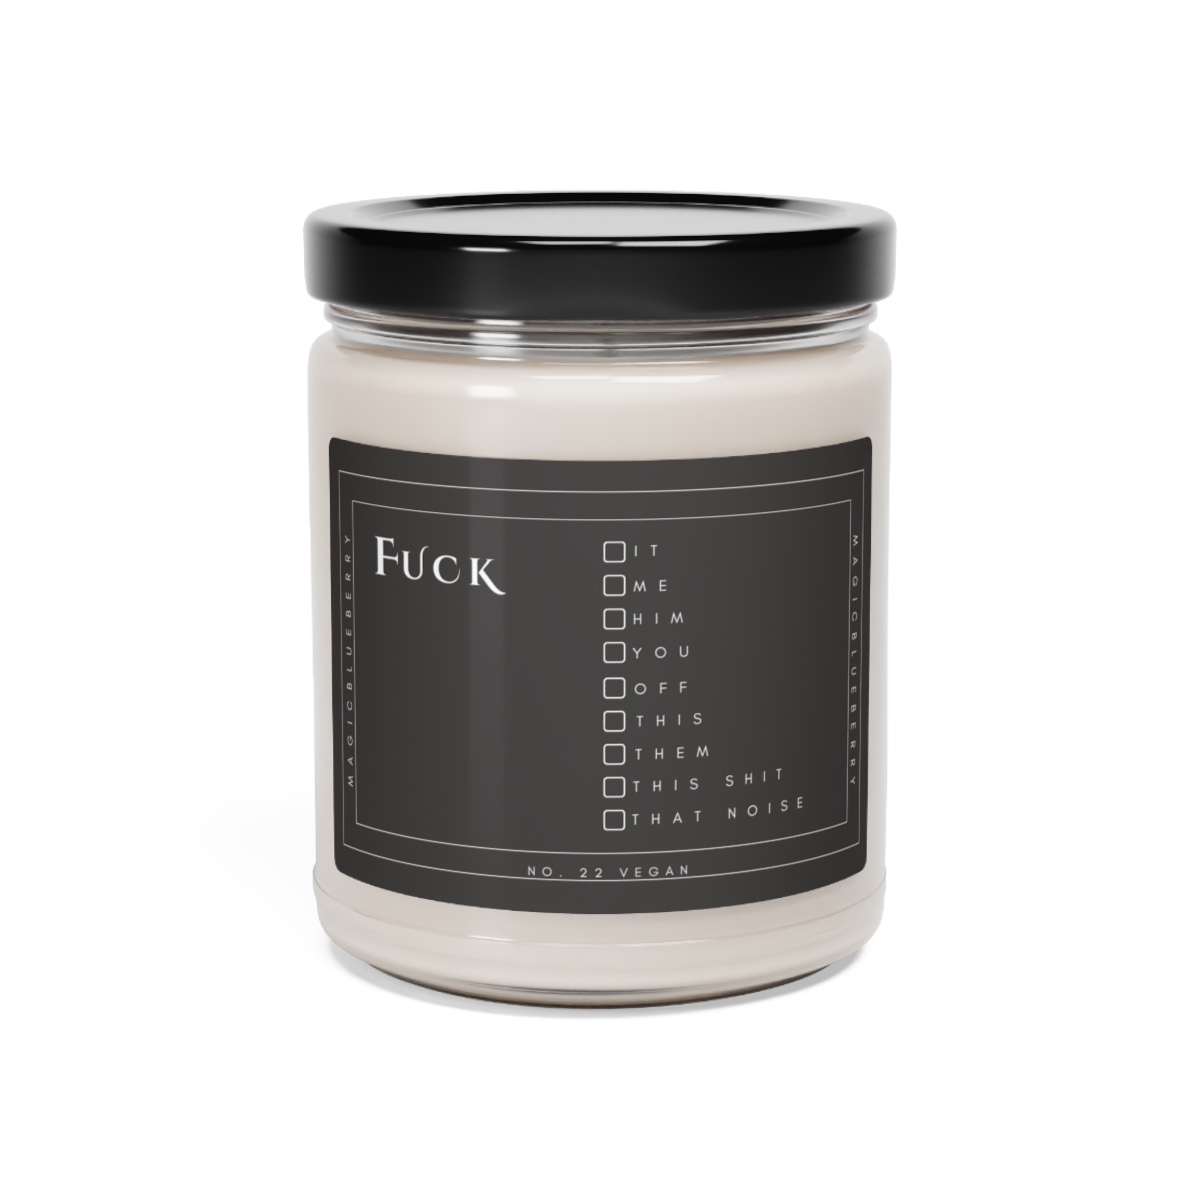 Fuck, Scented Vegan Soy Wax Candles, Clear Jar Candle, Spell Candles, Sassy Candle, Vegan Candle, Cotton Wick Candle, Home Deco product thumbnail image